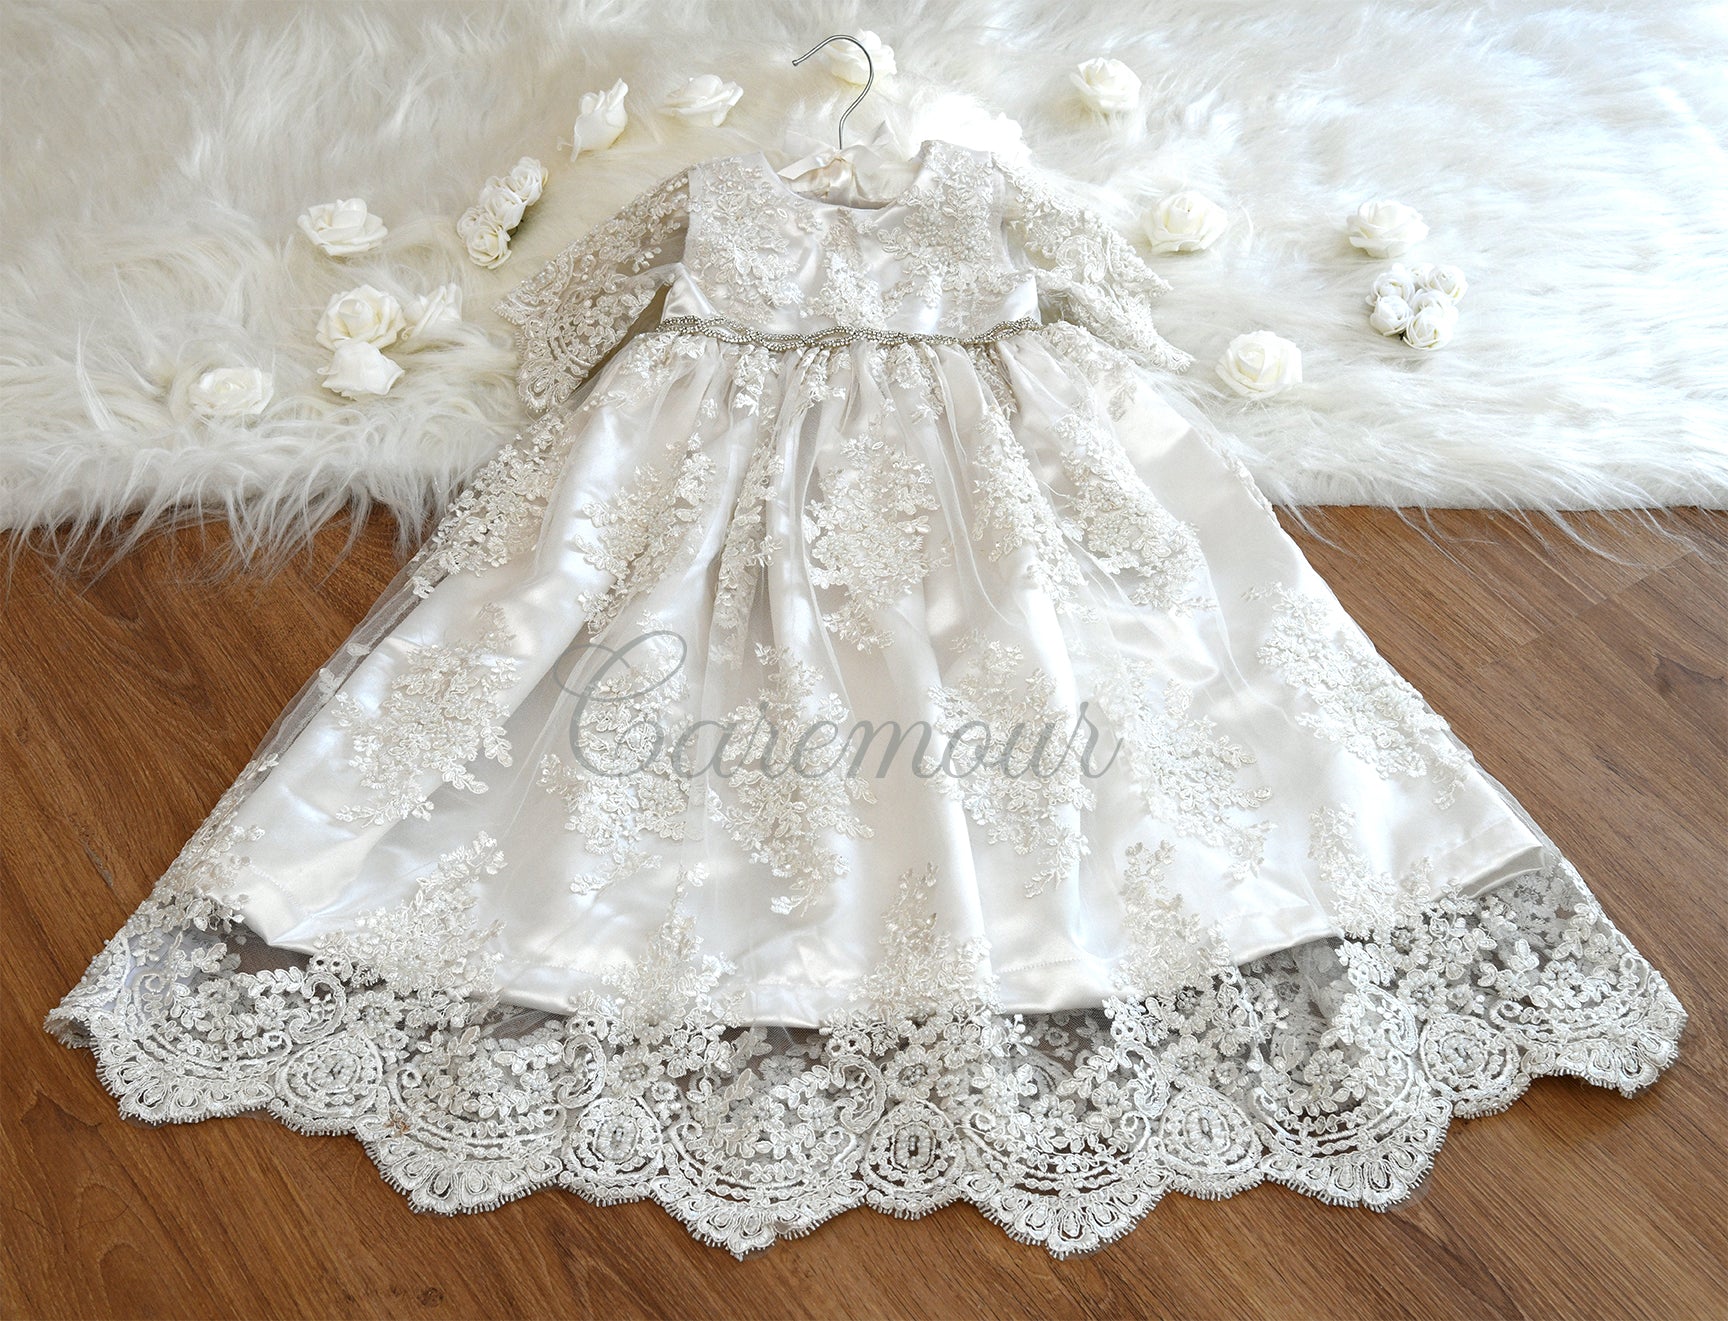 ivory lace christening gown